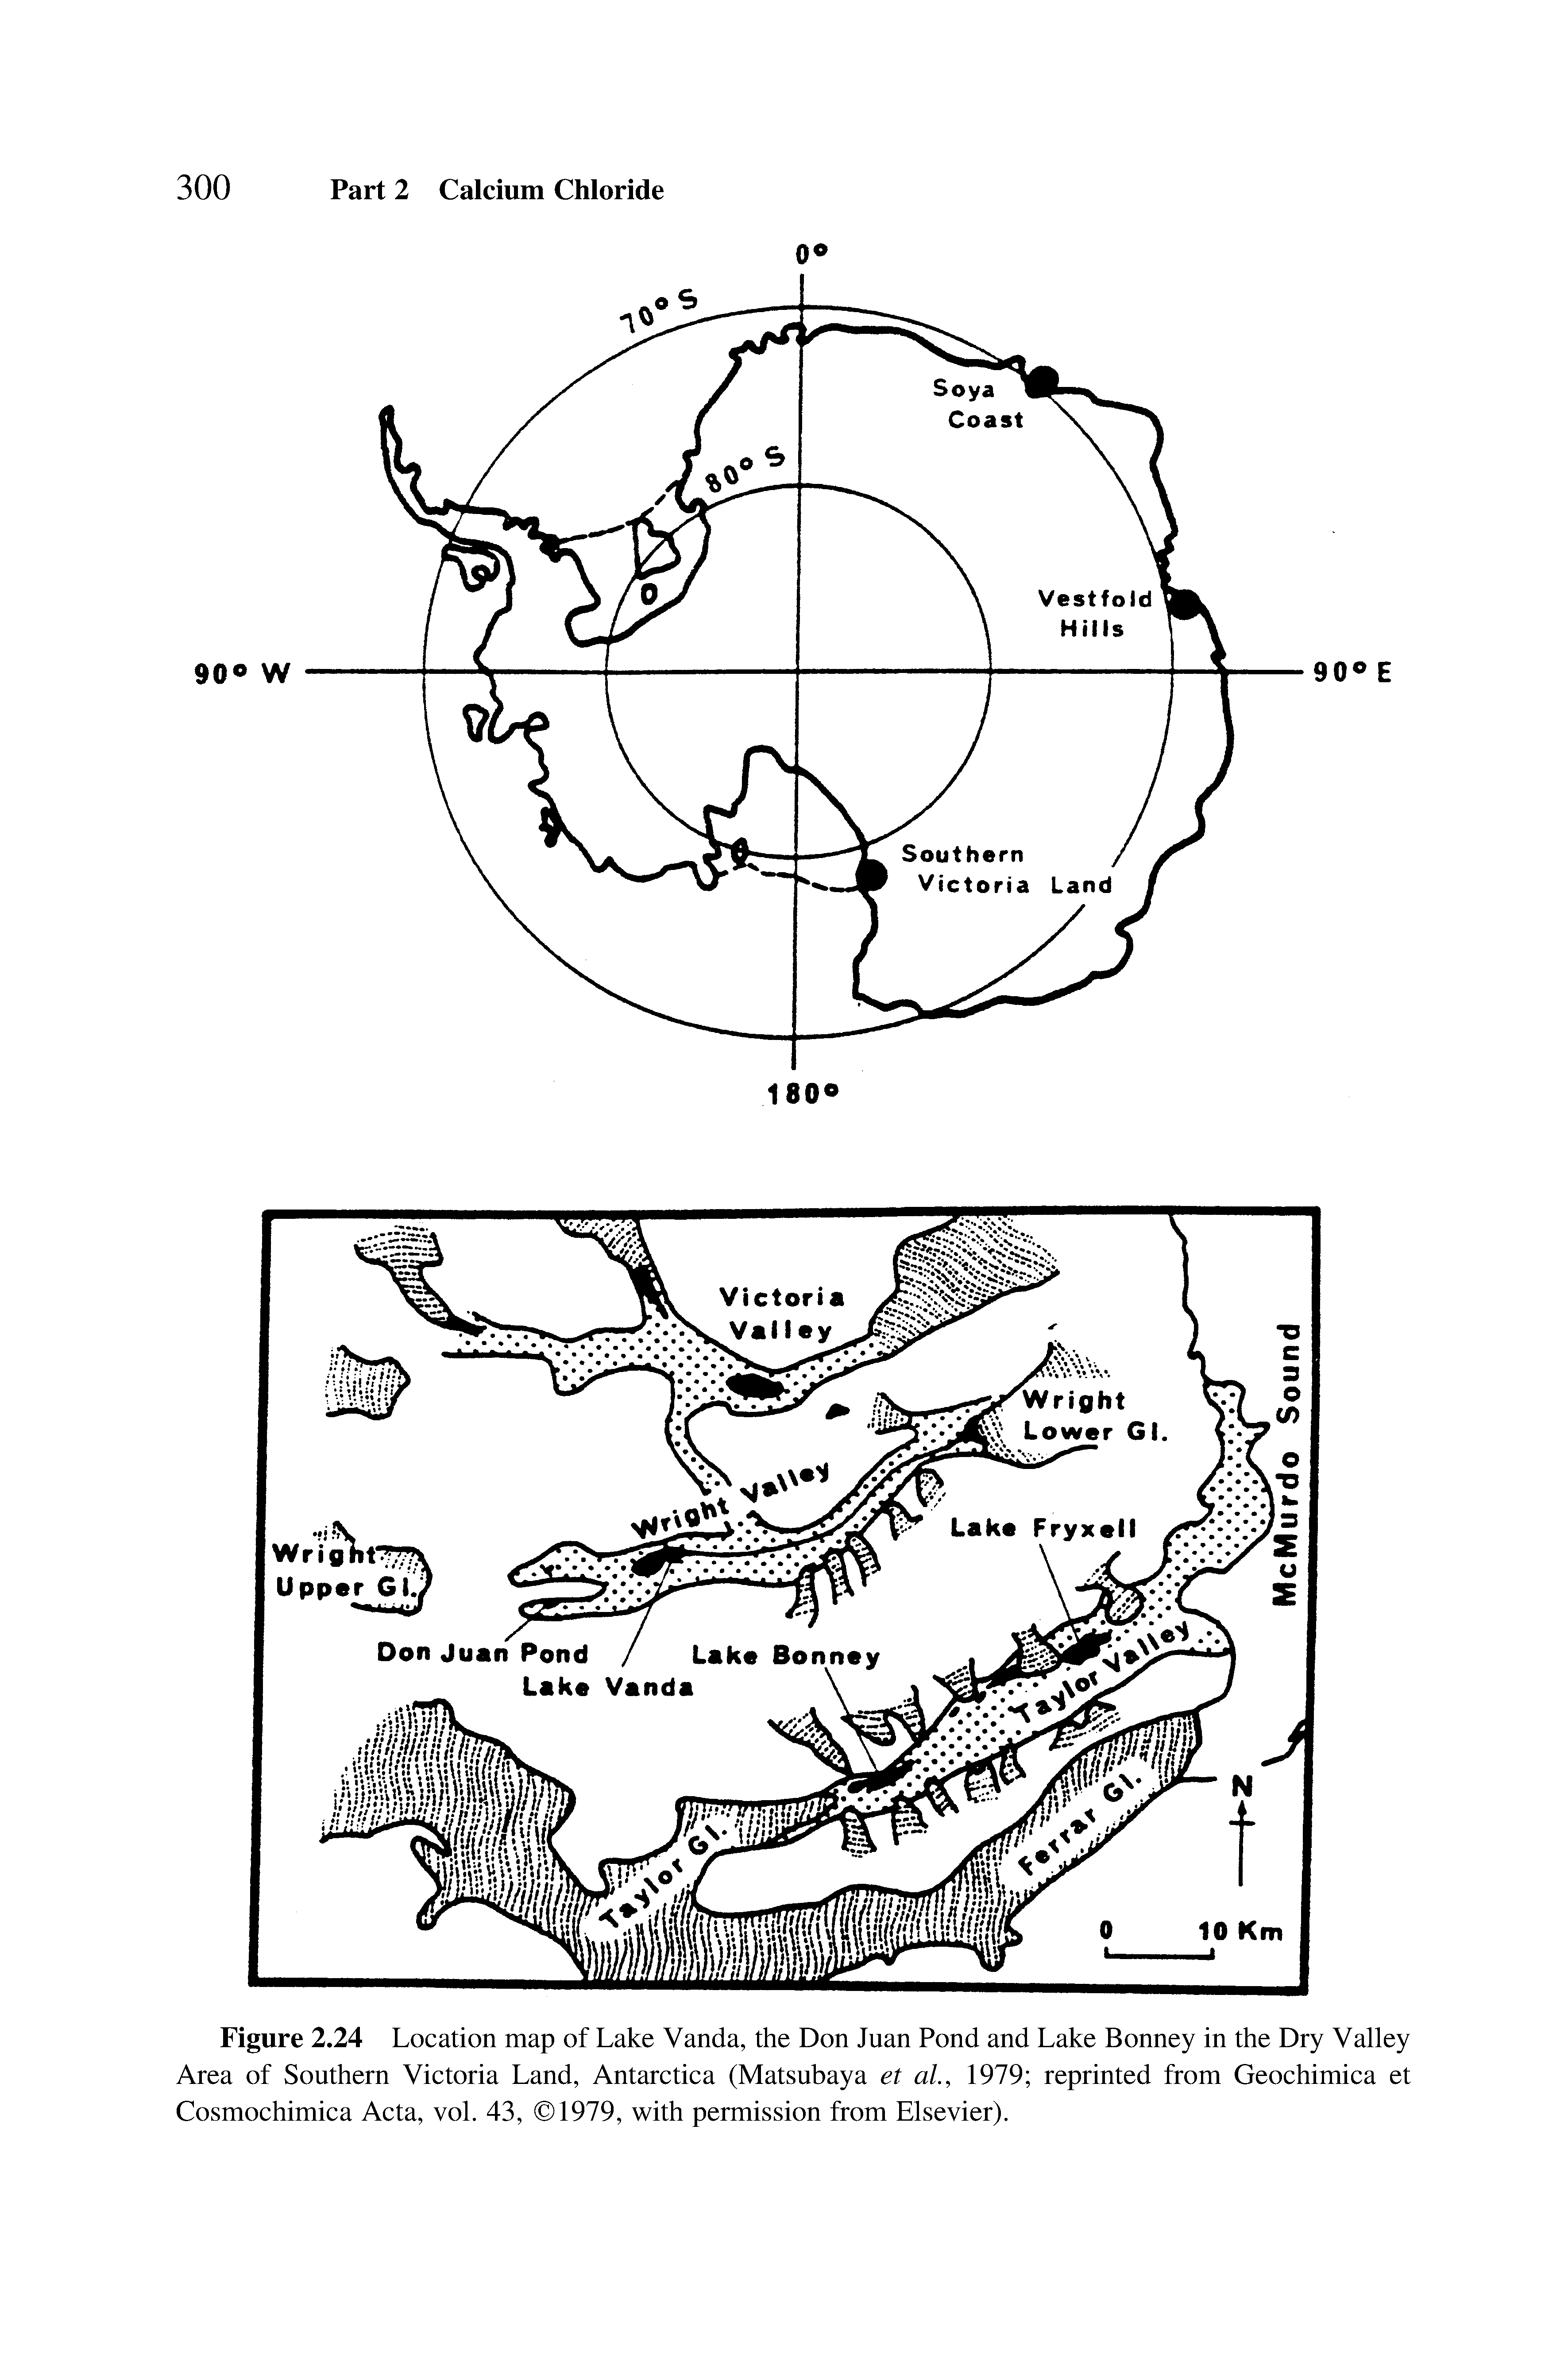 Figure 2.24 Location map of Lake Vanda, the Don Juan Pond and Lake Bonney in the Dry Valley Area of Southern Victoria Land, Antarctica (Matsubaya et al, 1979 reprinted from Geochimica et Cosmochimica Acta, vol. 43, 1979, with permission from Elsevier).